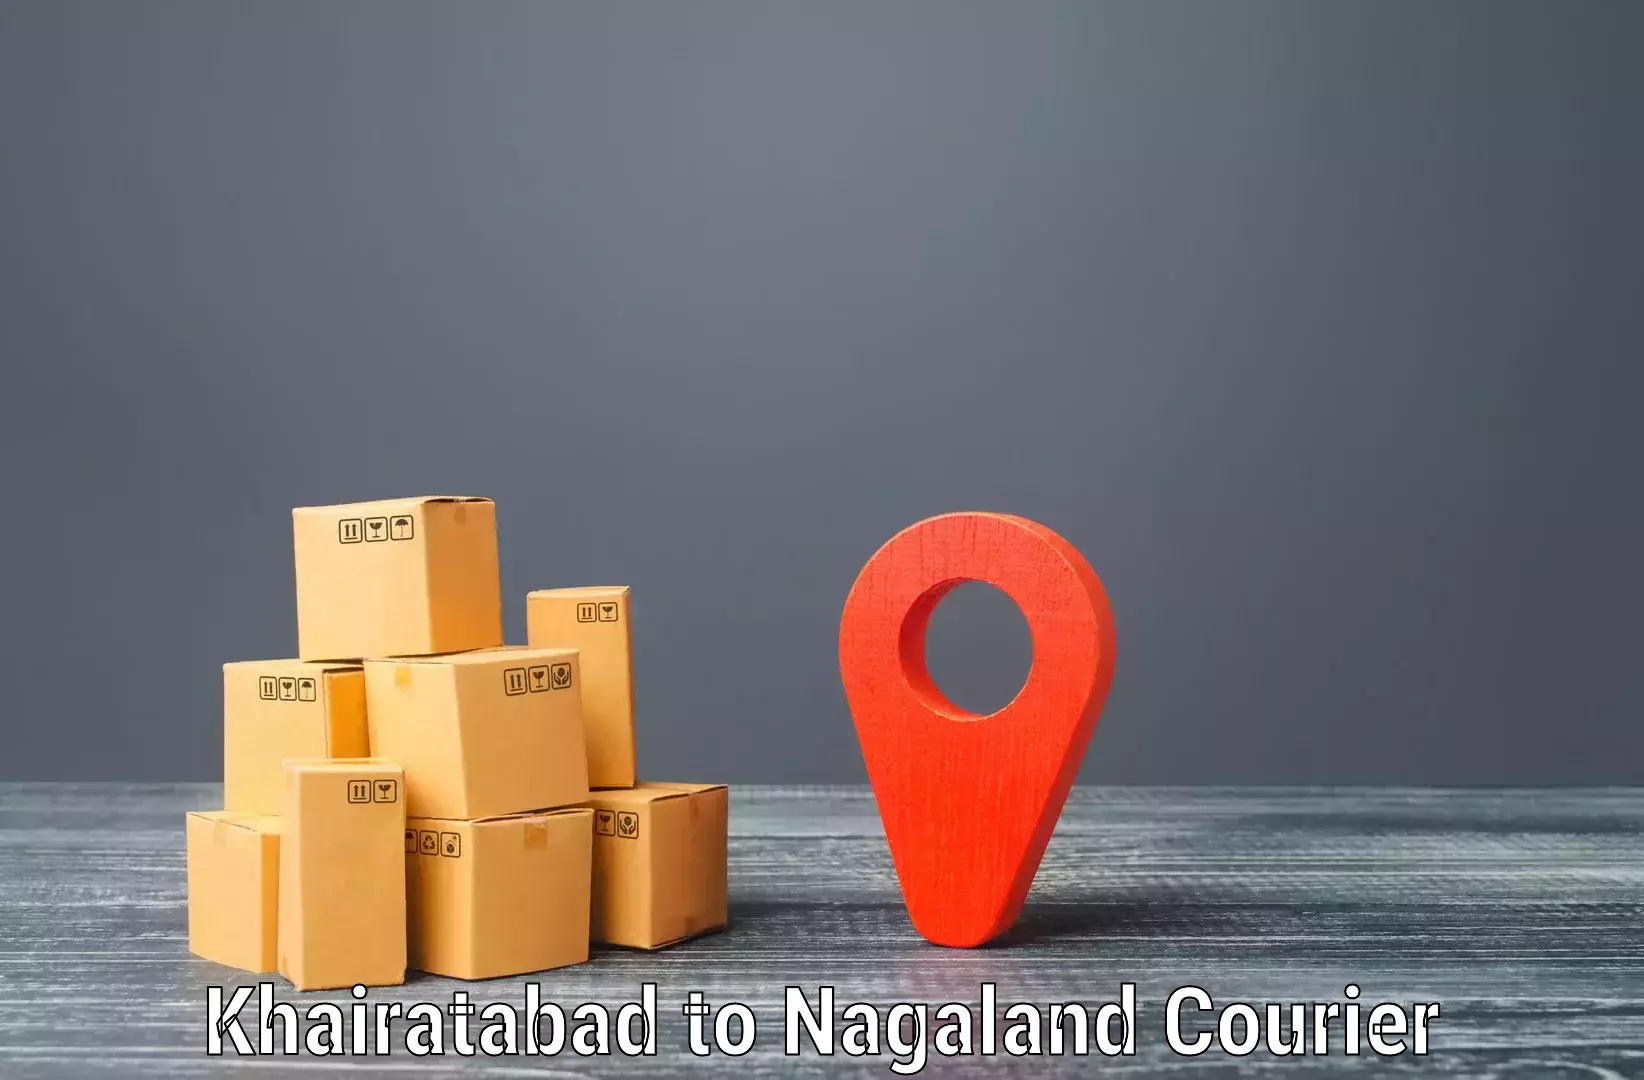 Express delivery network Khairatabad to Phek